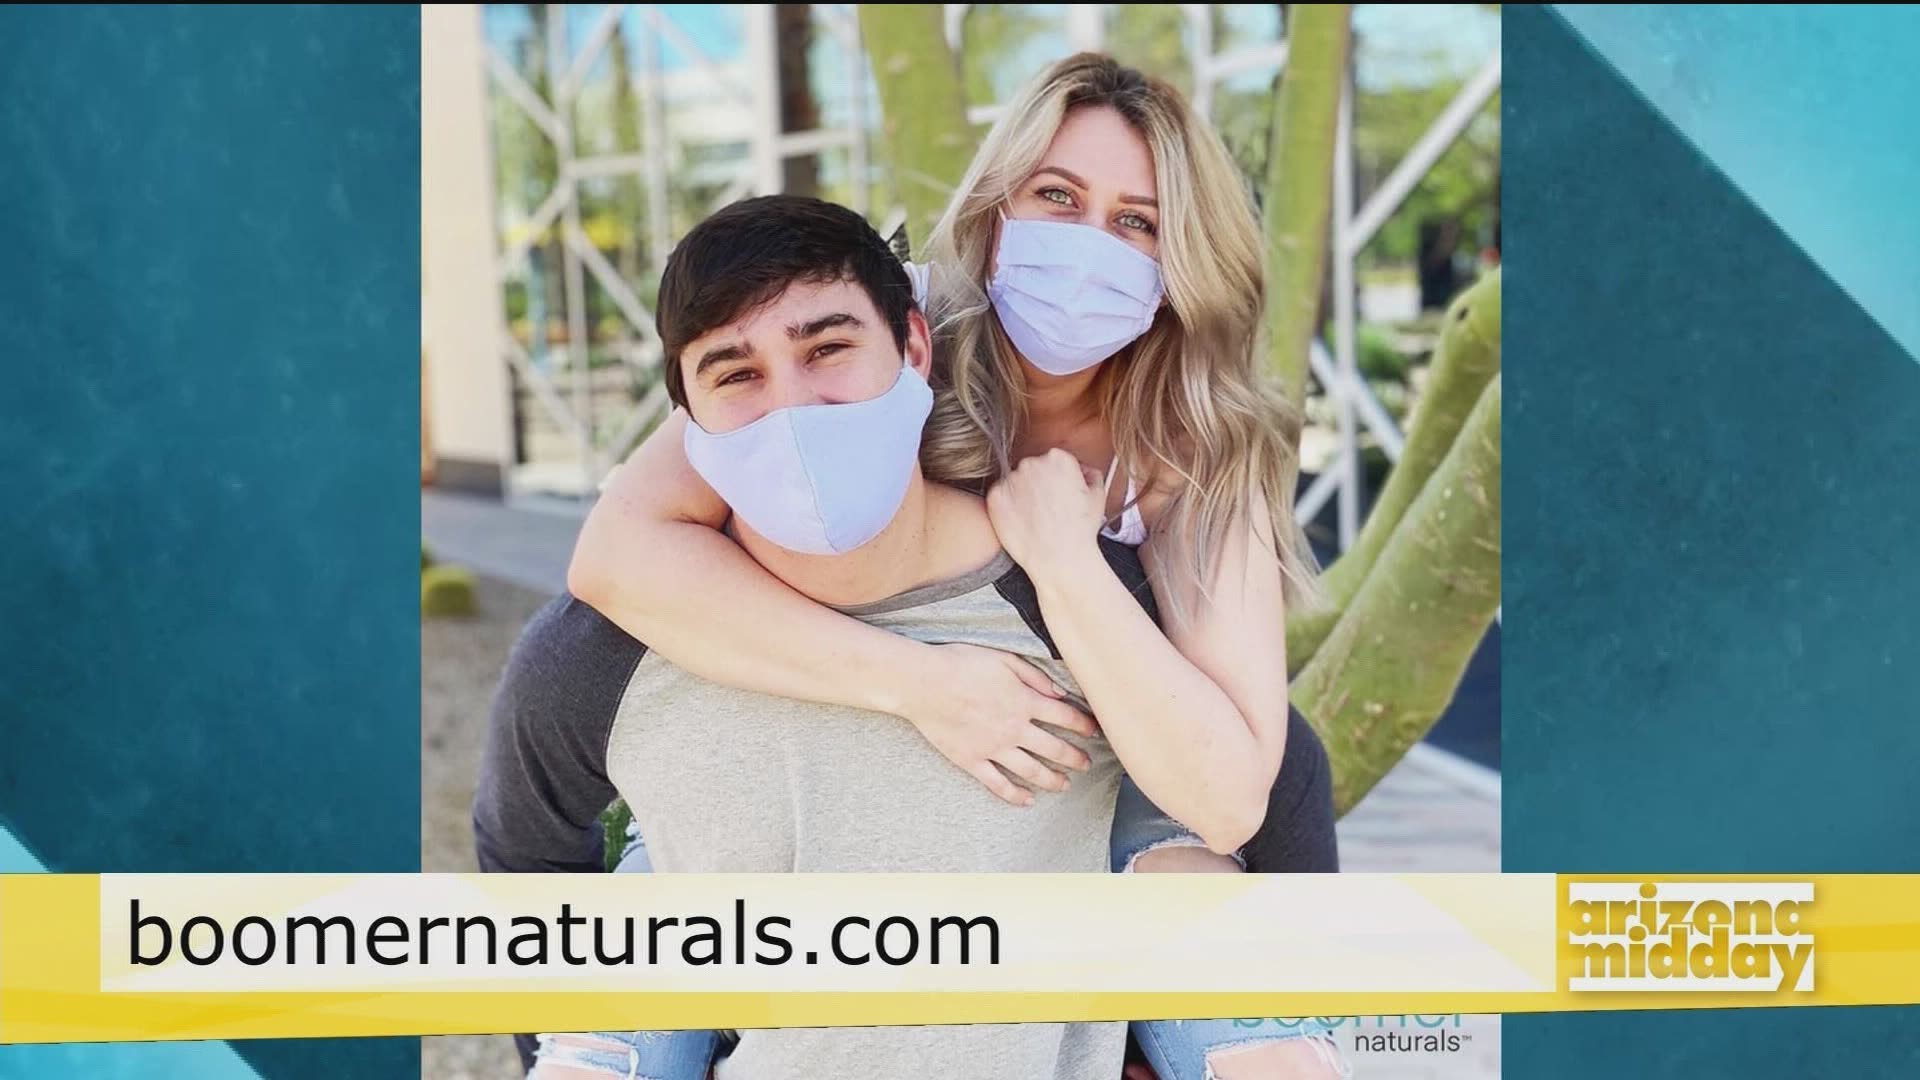 Dr. Christina Madison shows us how to properly wear a mask and why it's so important right now to wear one in public